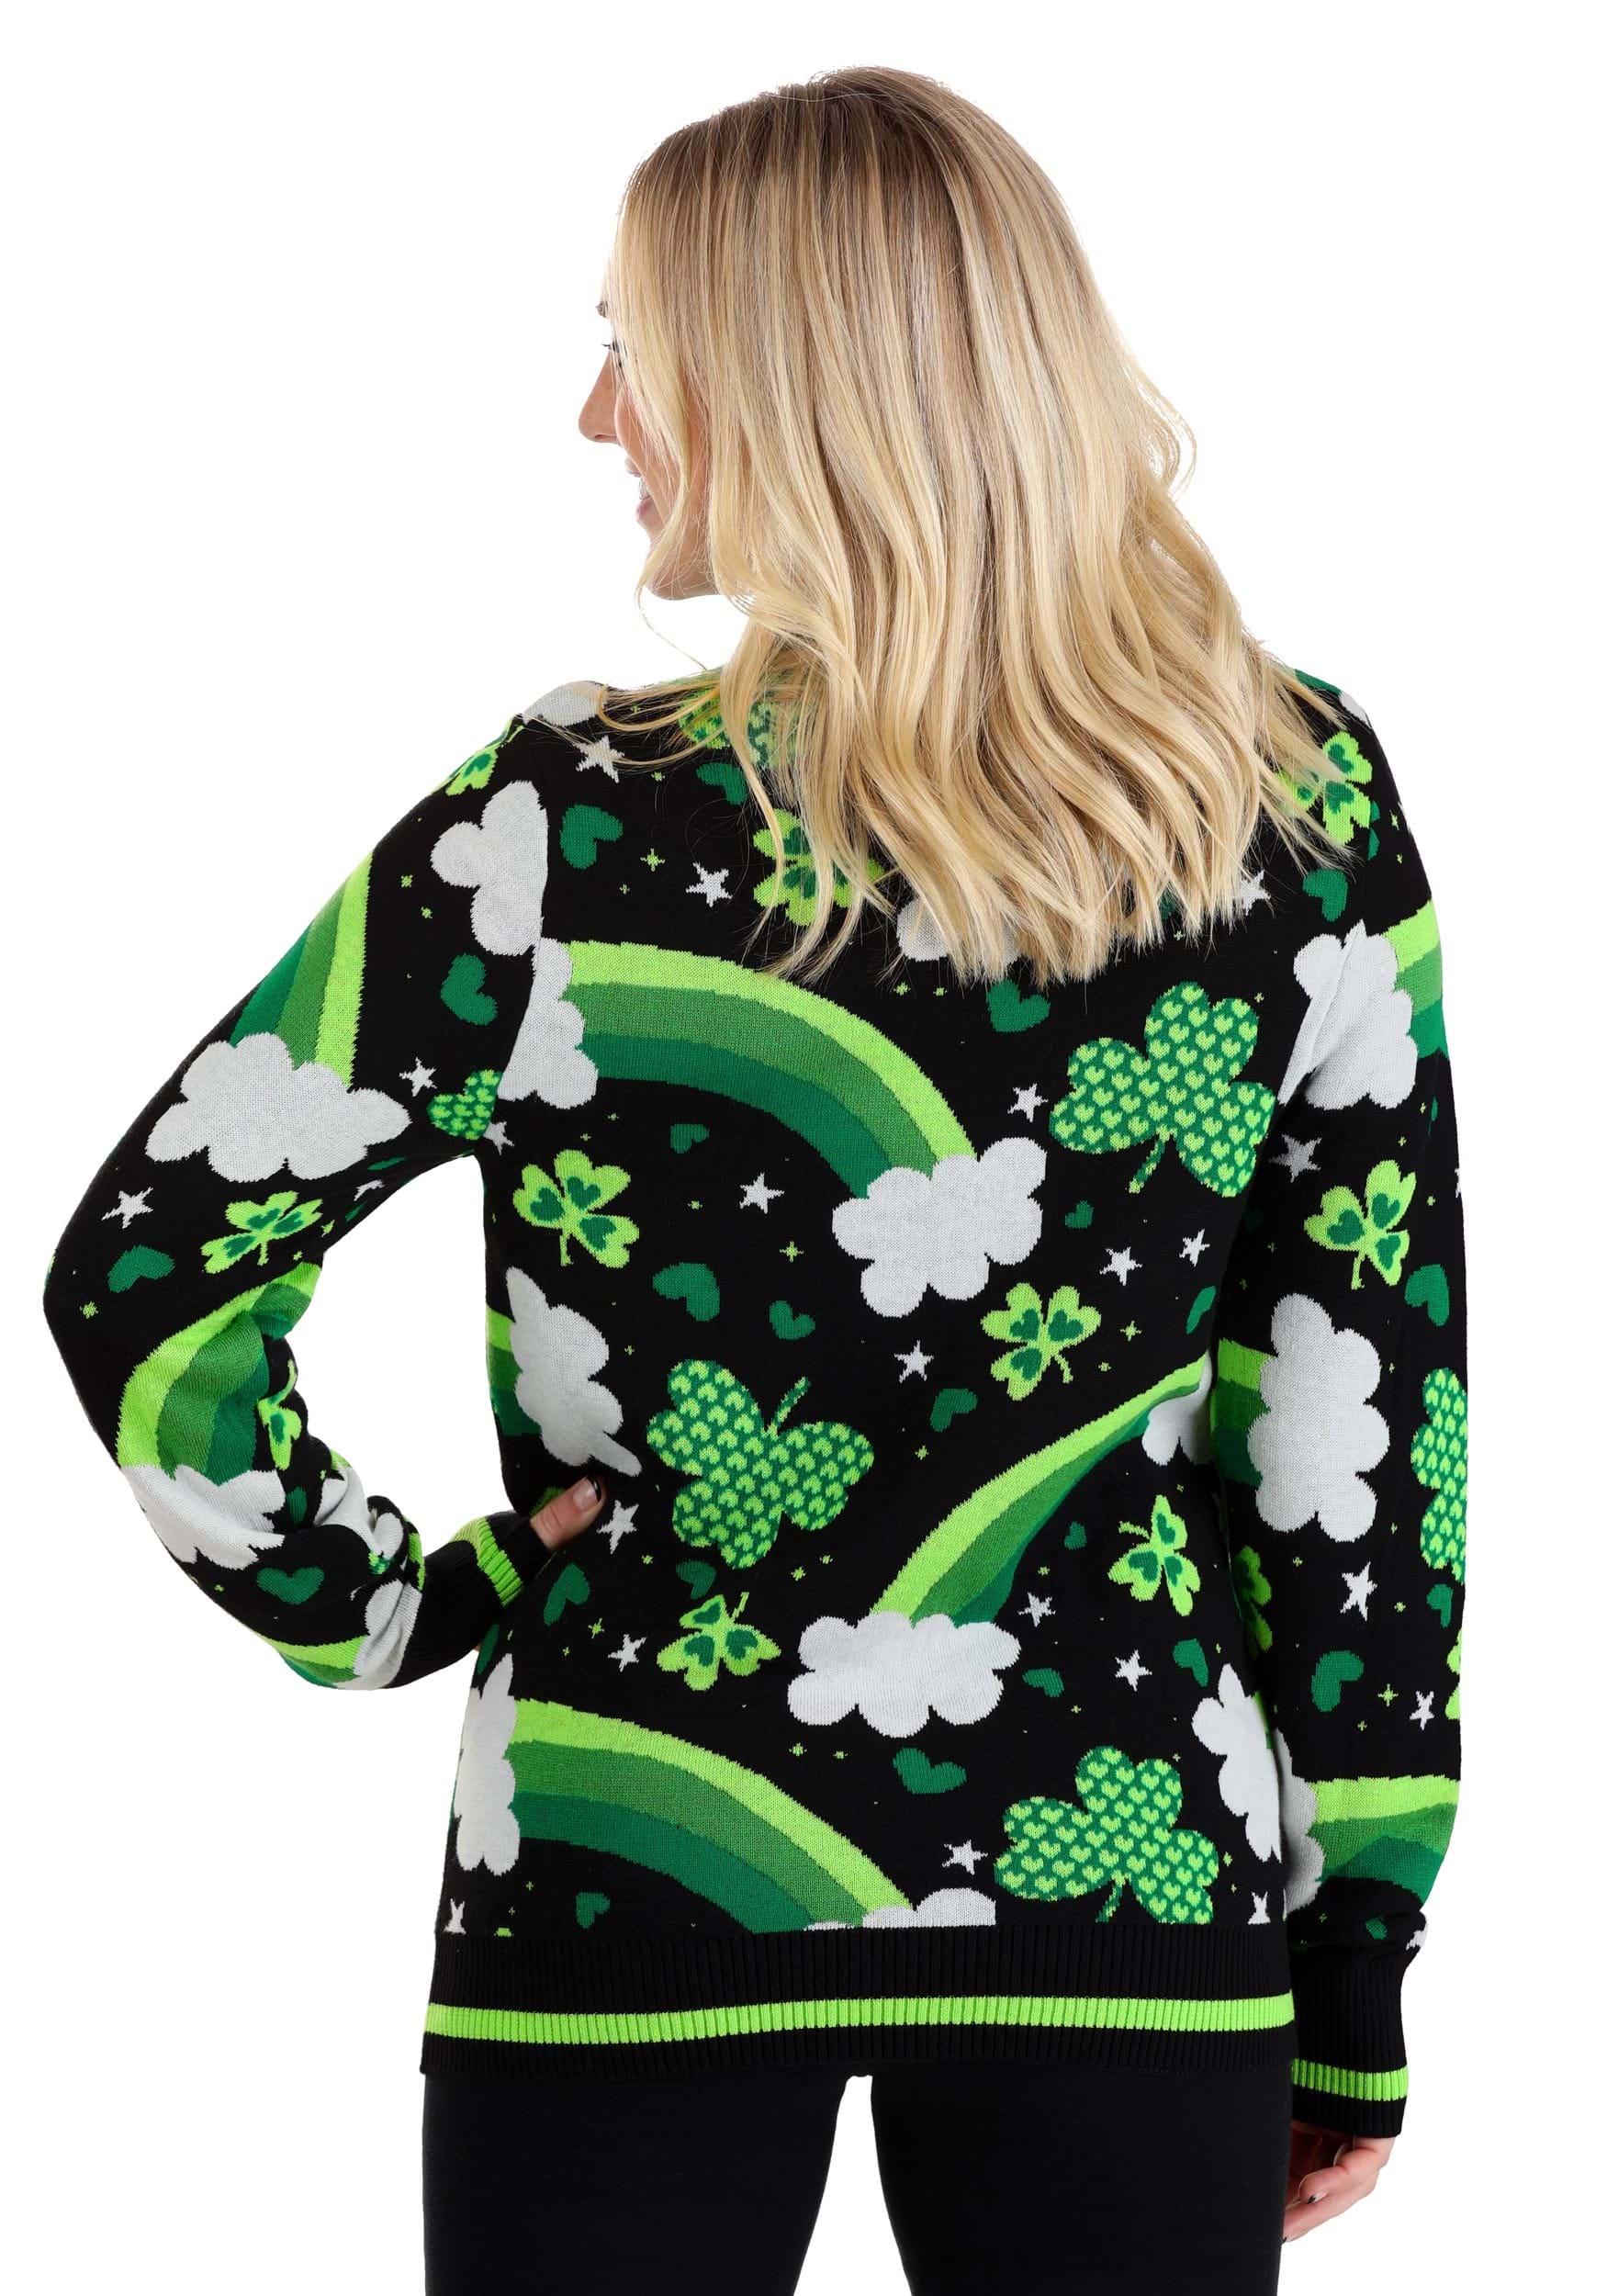 St. Patrick's Day Accessories and Clothing Ideas — Shopping on Champagne, Nancy Queen